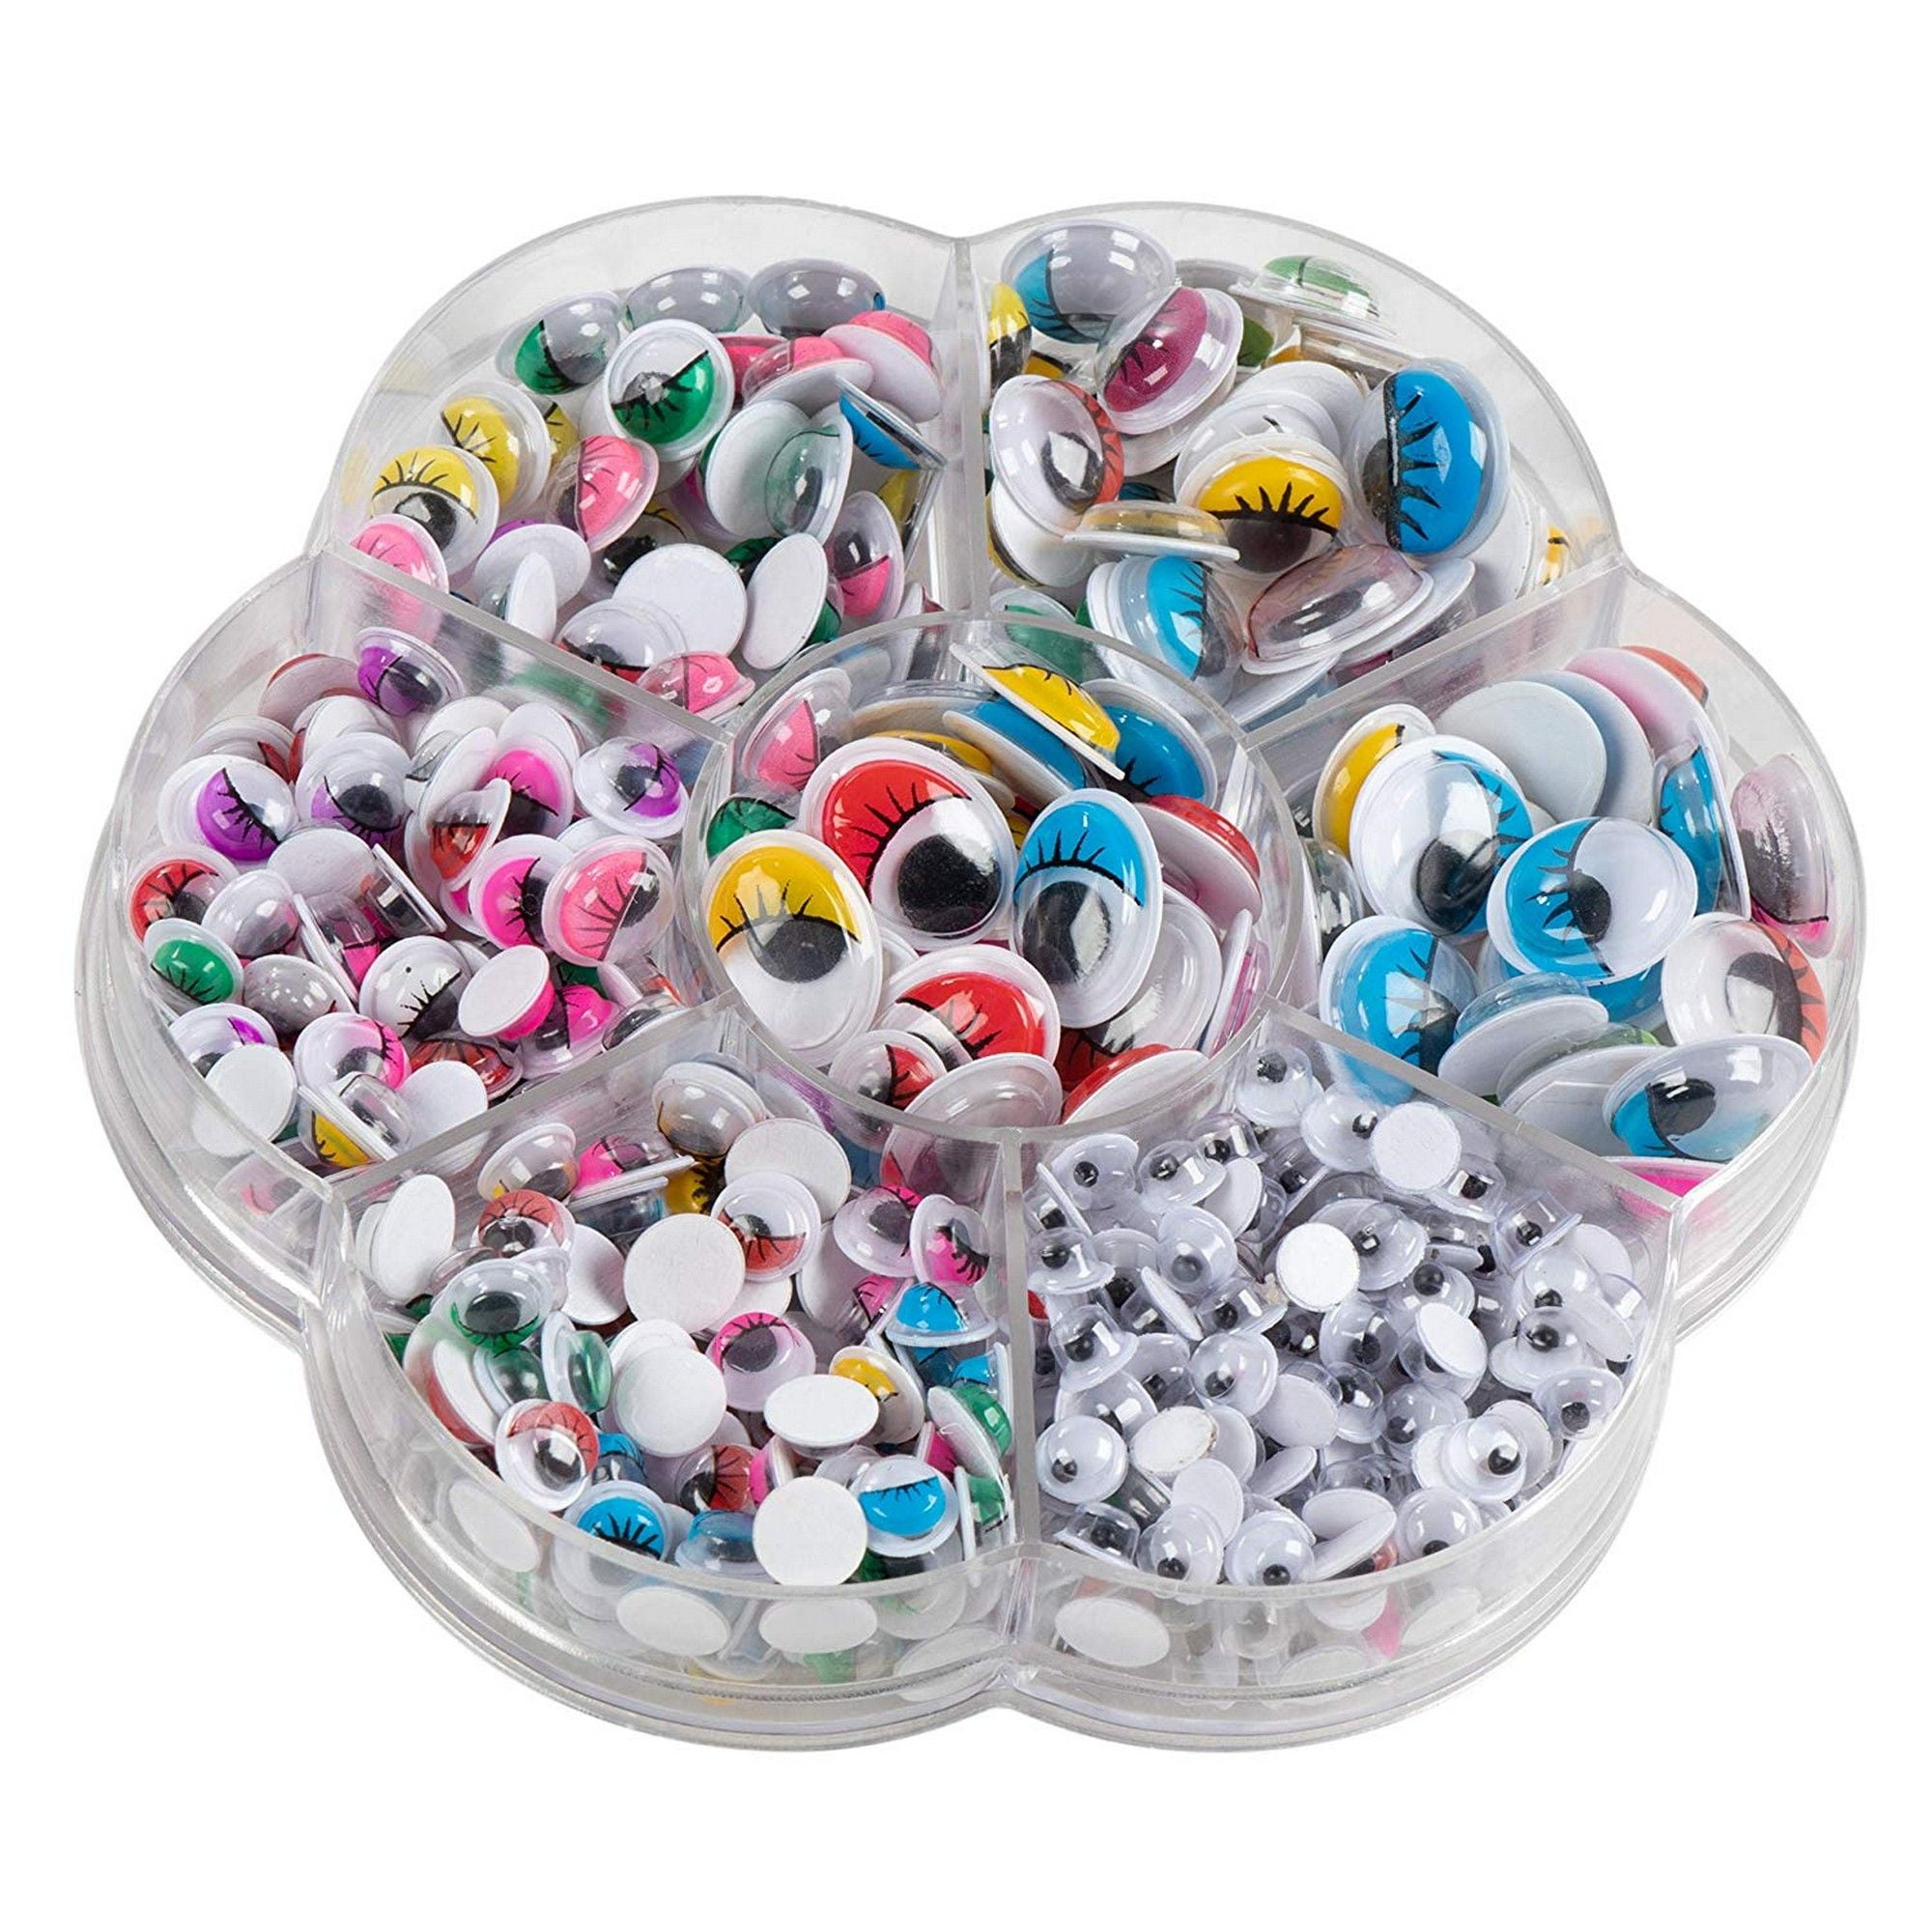 Bulk Pack of Multiple Sizes White and Black Googly Eyes for Crafts 500 Ifavor123 Wiggle Eyes for Creative DIY Projects 